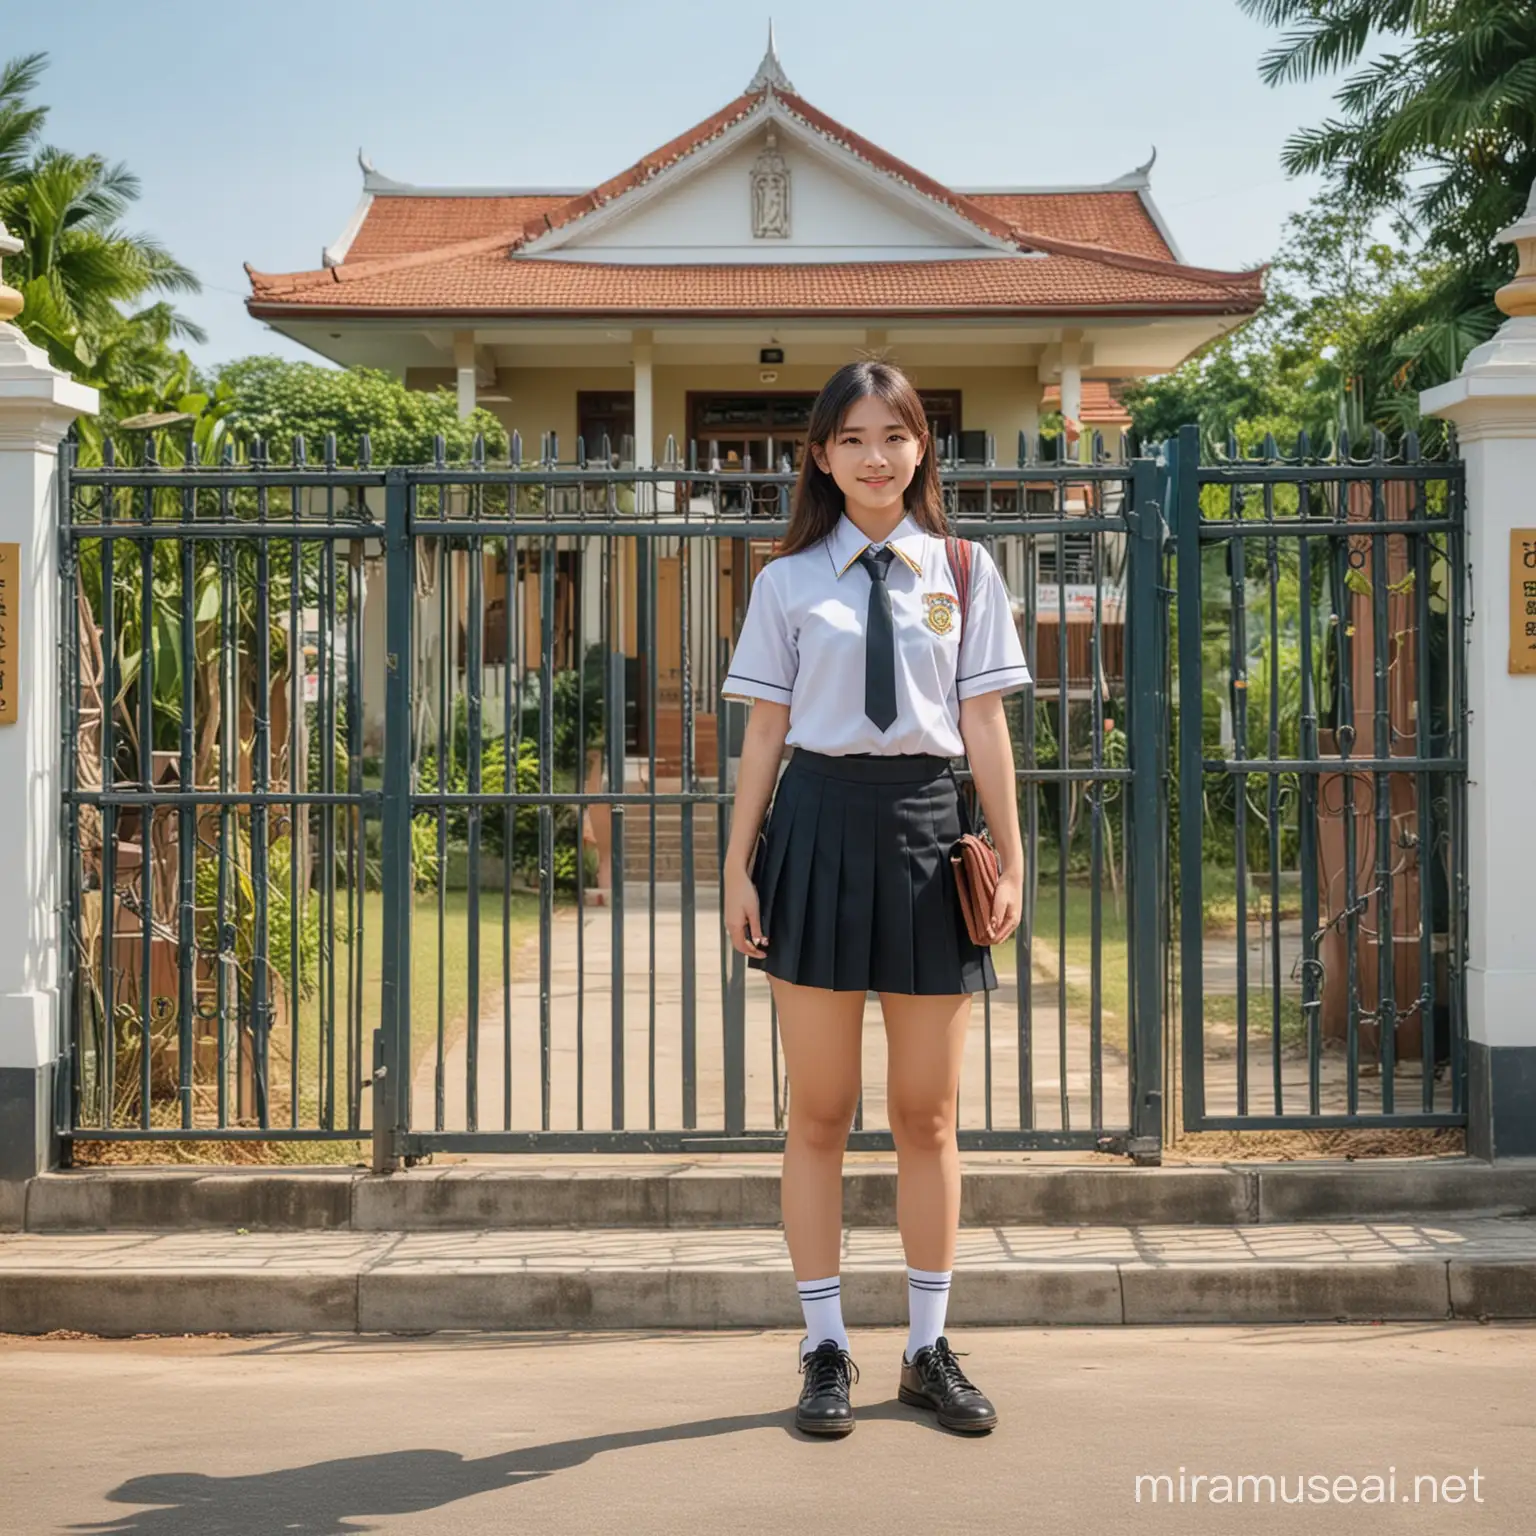 Thai High School Couple Stands Together in Sunshine by School Gate